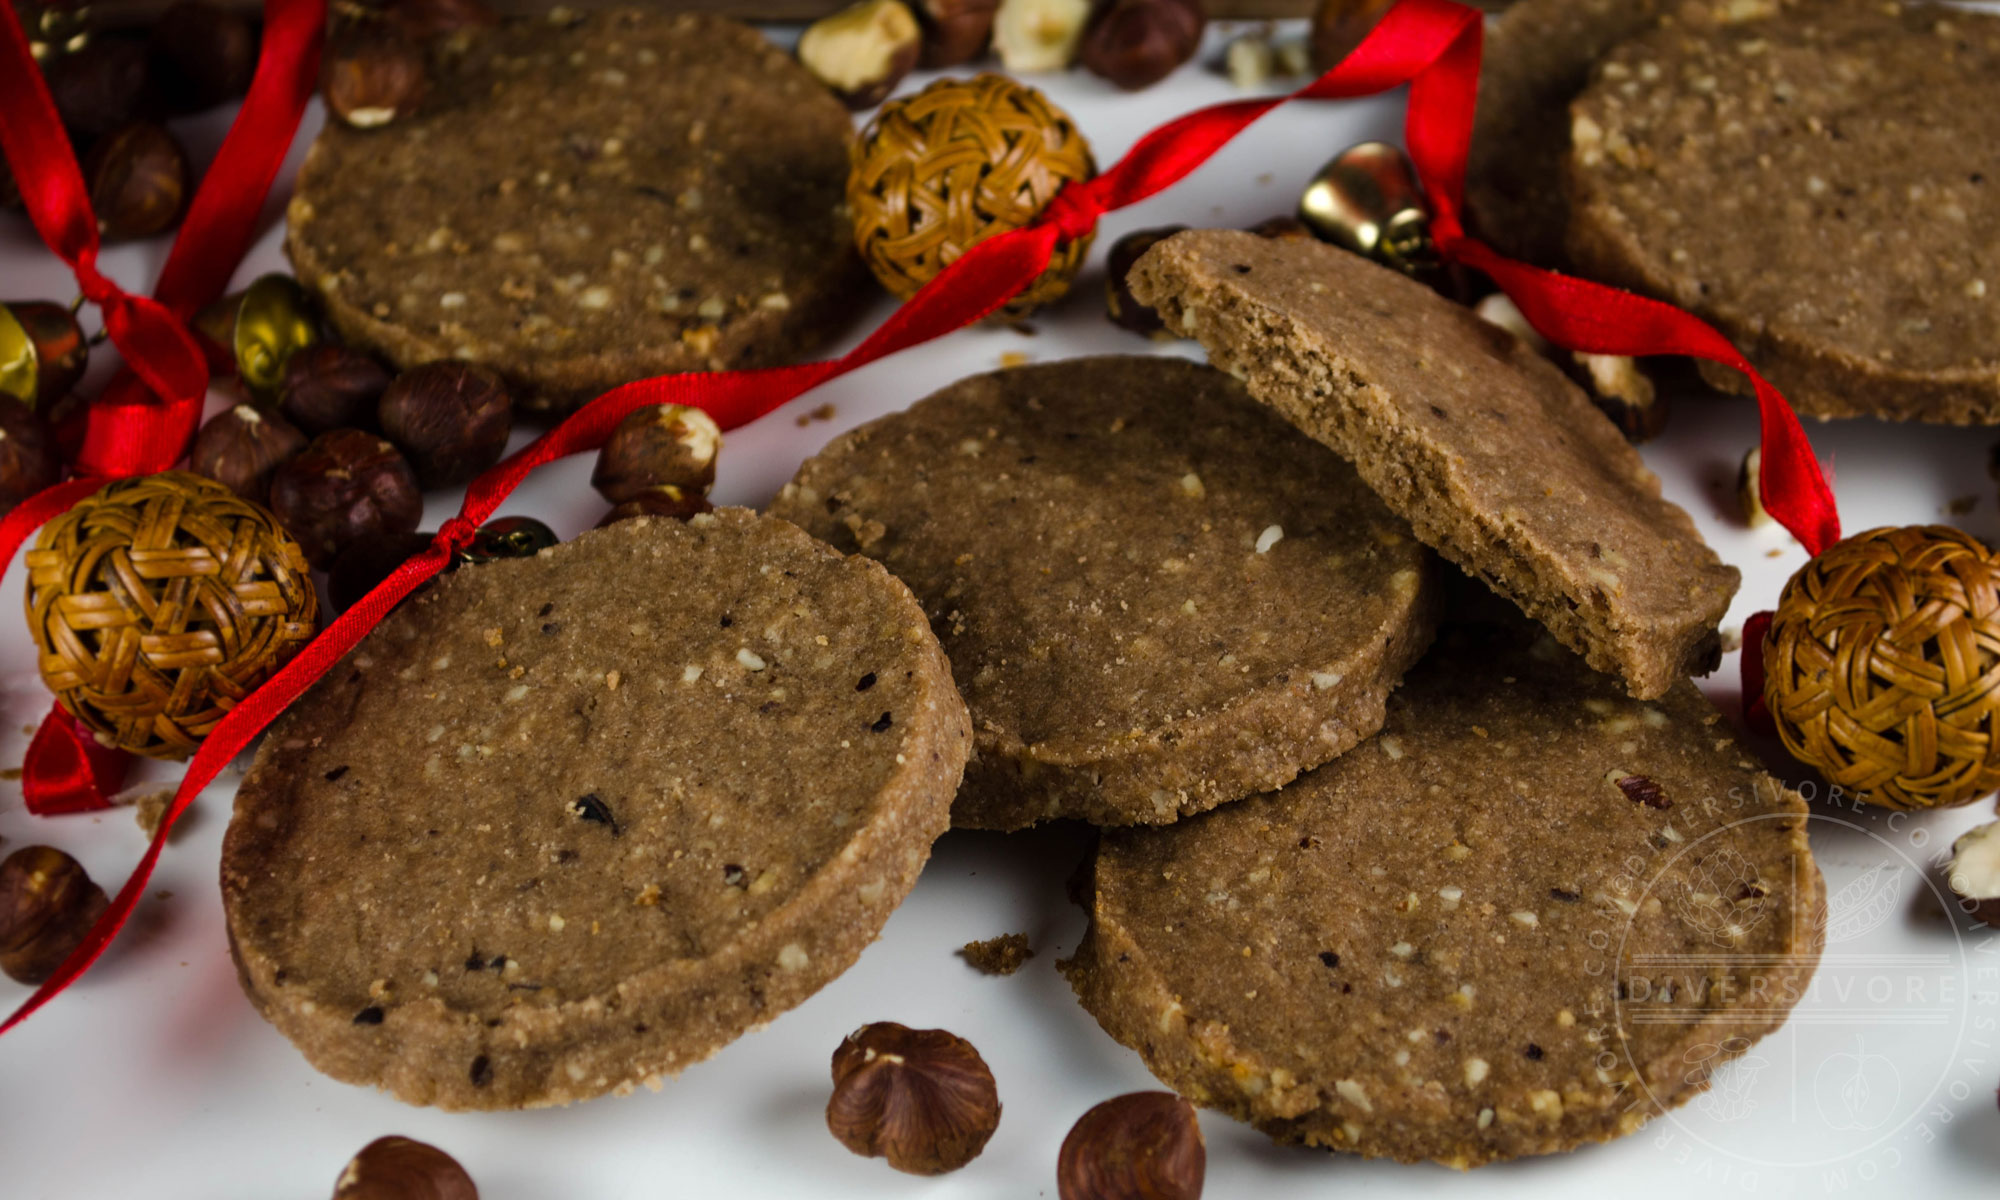 Chocolate Hazelnut Shortbread, made with simple ingredients